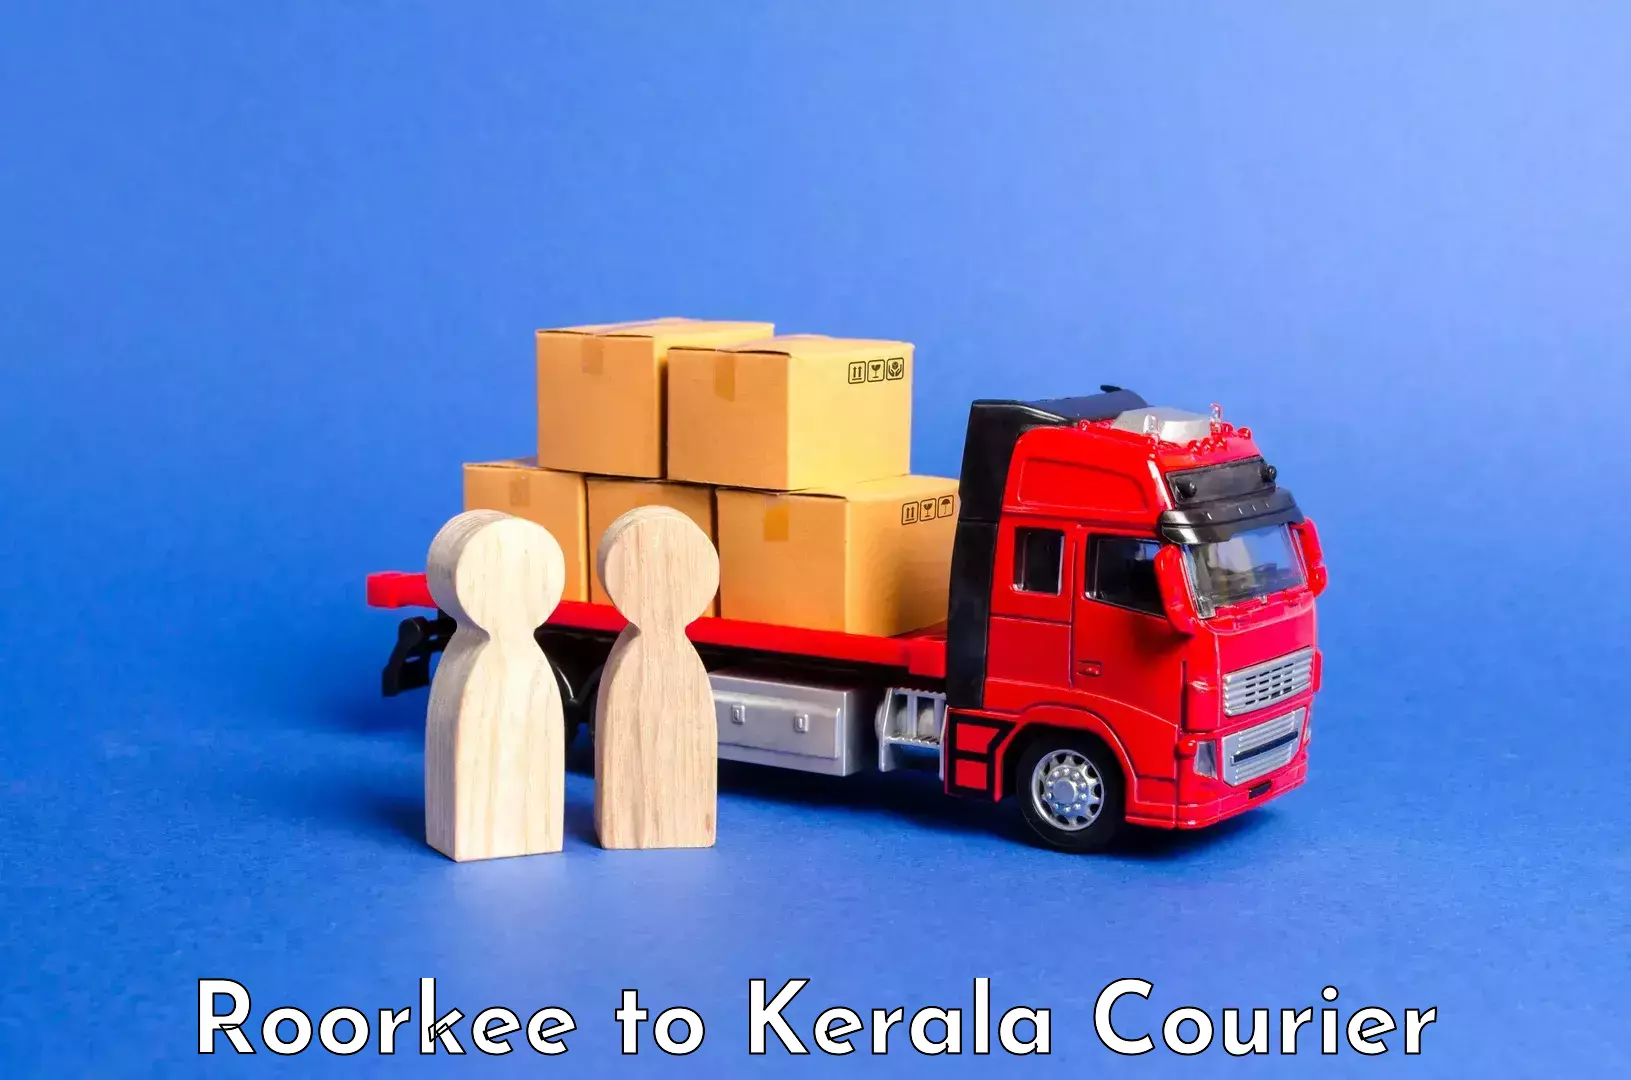 Luggage delivery providers Roorkee to Trivandrum